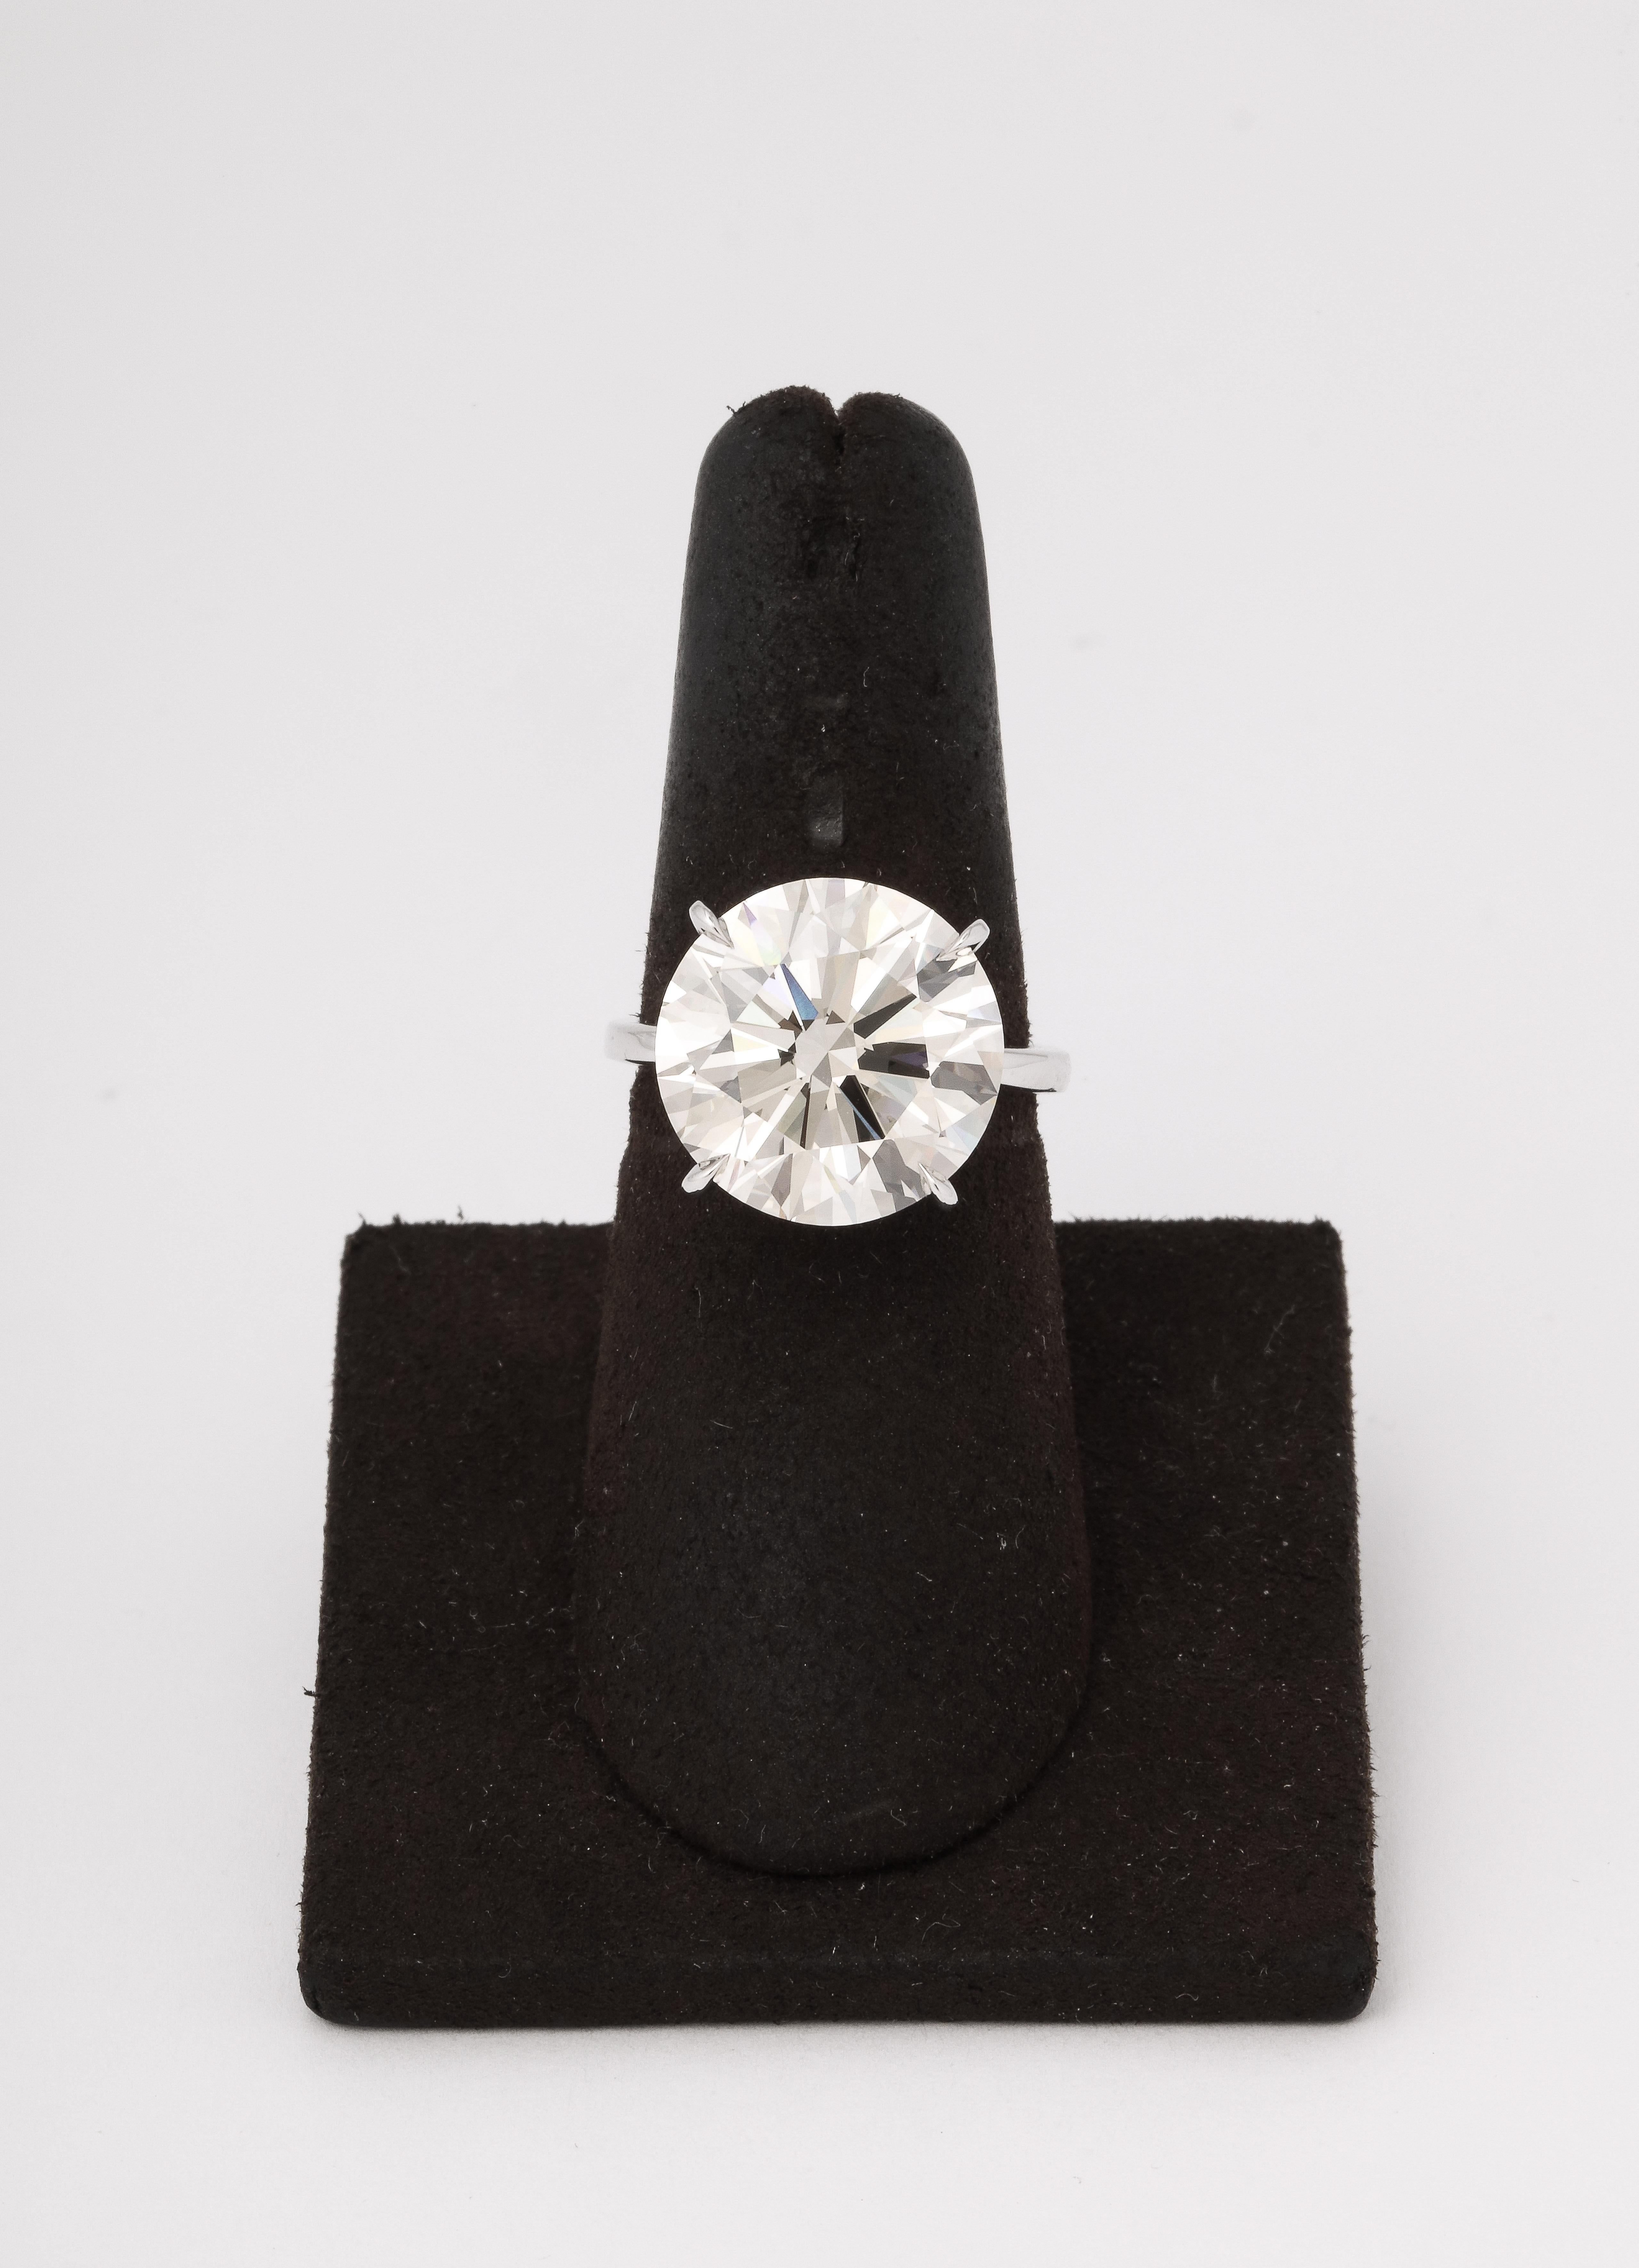 
An AMAZING ROCK! 

GIA certified 11.07 carat Round Brilliant cut diamond. Set in a 4 prong custom made platinum mounting. 

The diamond faces up as a near colorless white stone. 

The diamond is VVS1 clarity and “triple excellent” Excellent Cut,